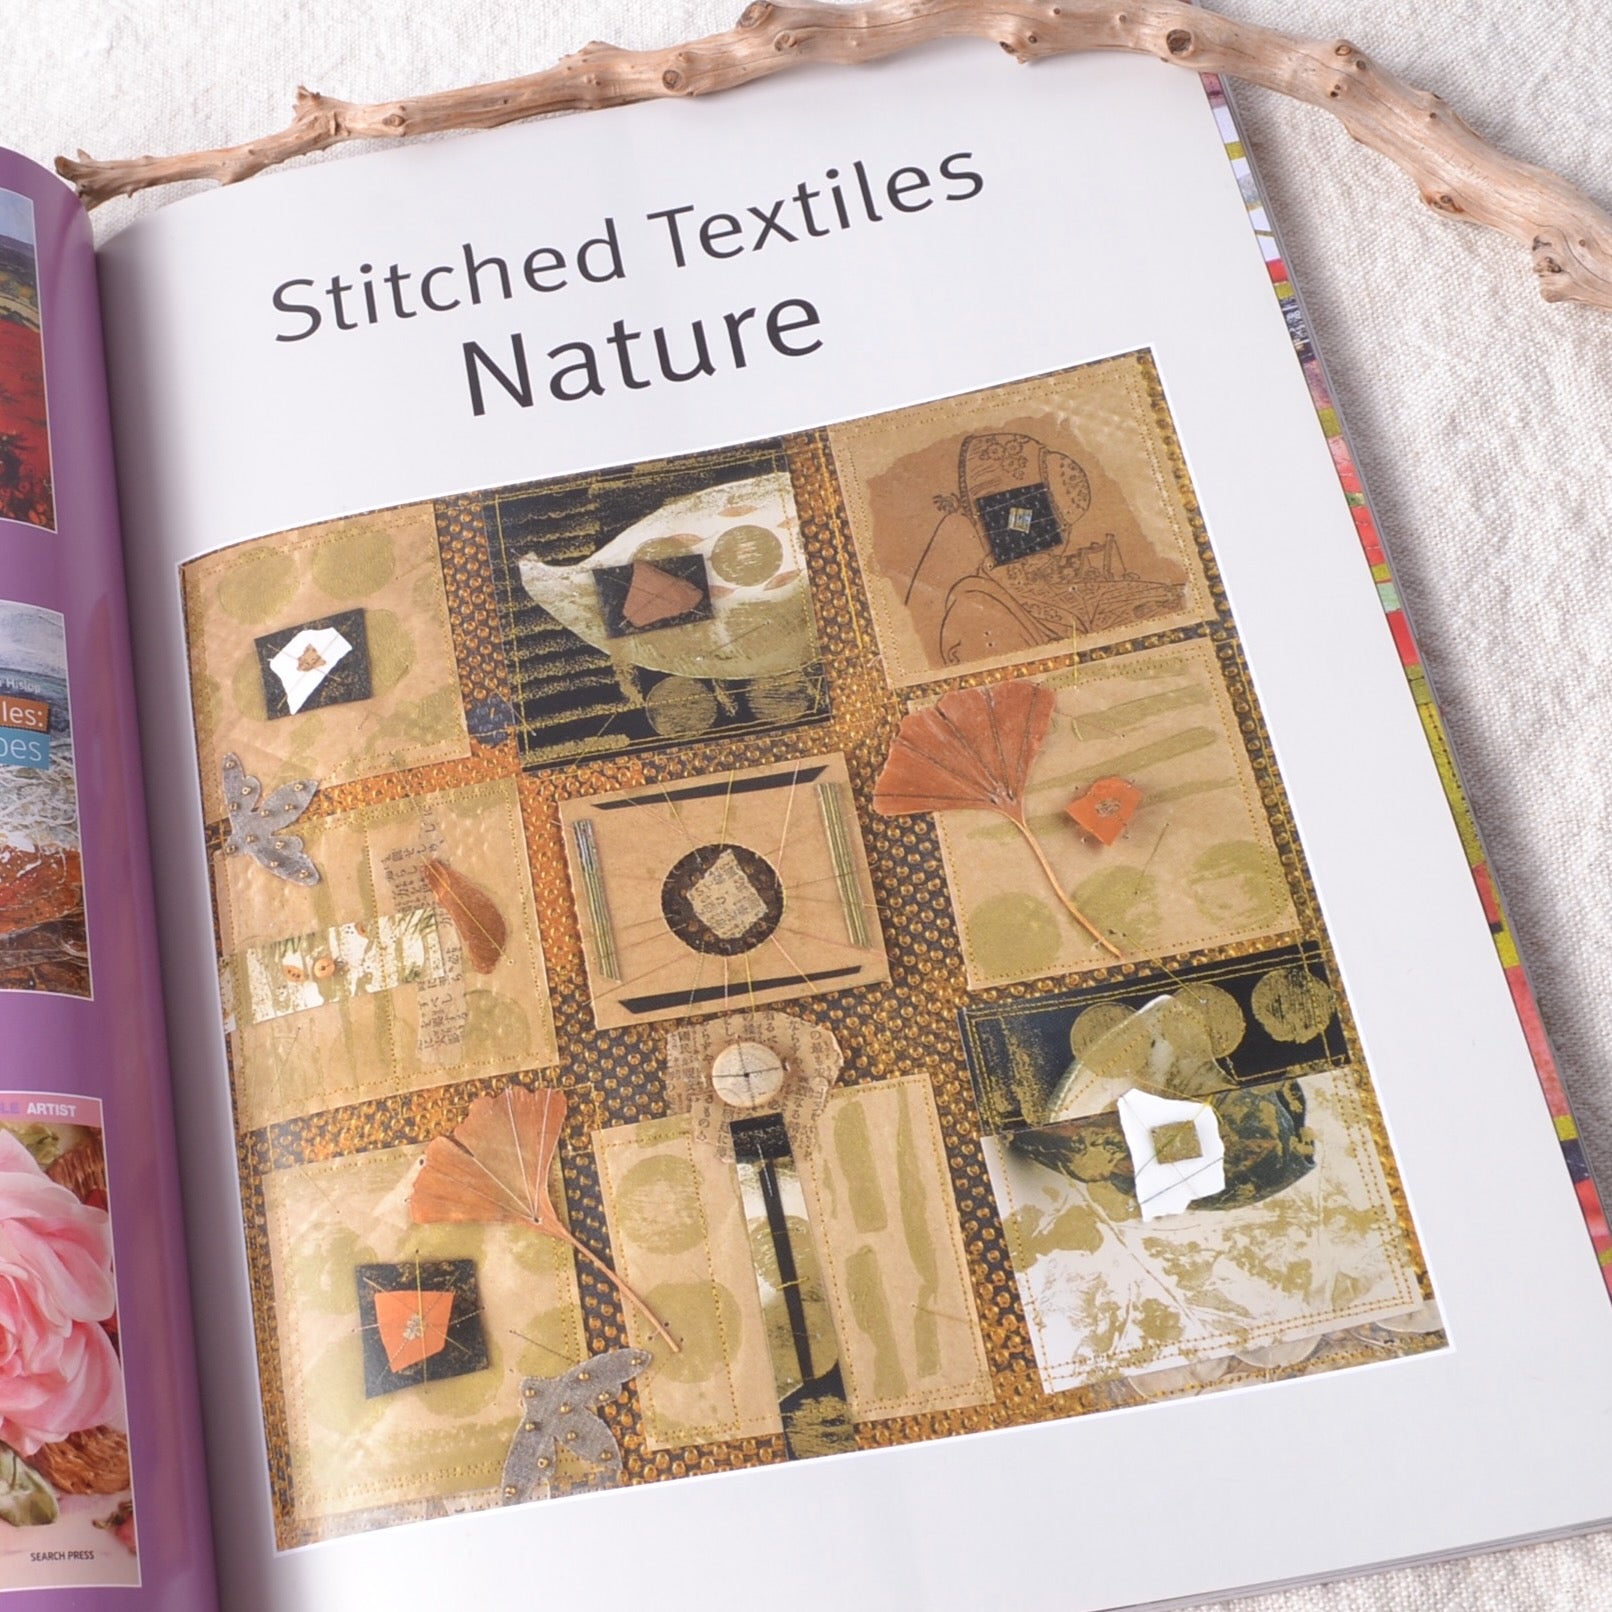 Stitched Textiles: Nature by Stephanie Redfern